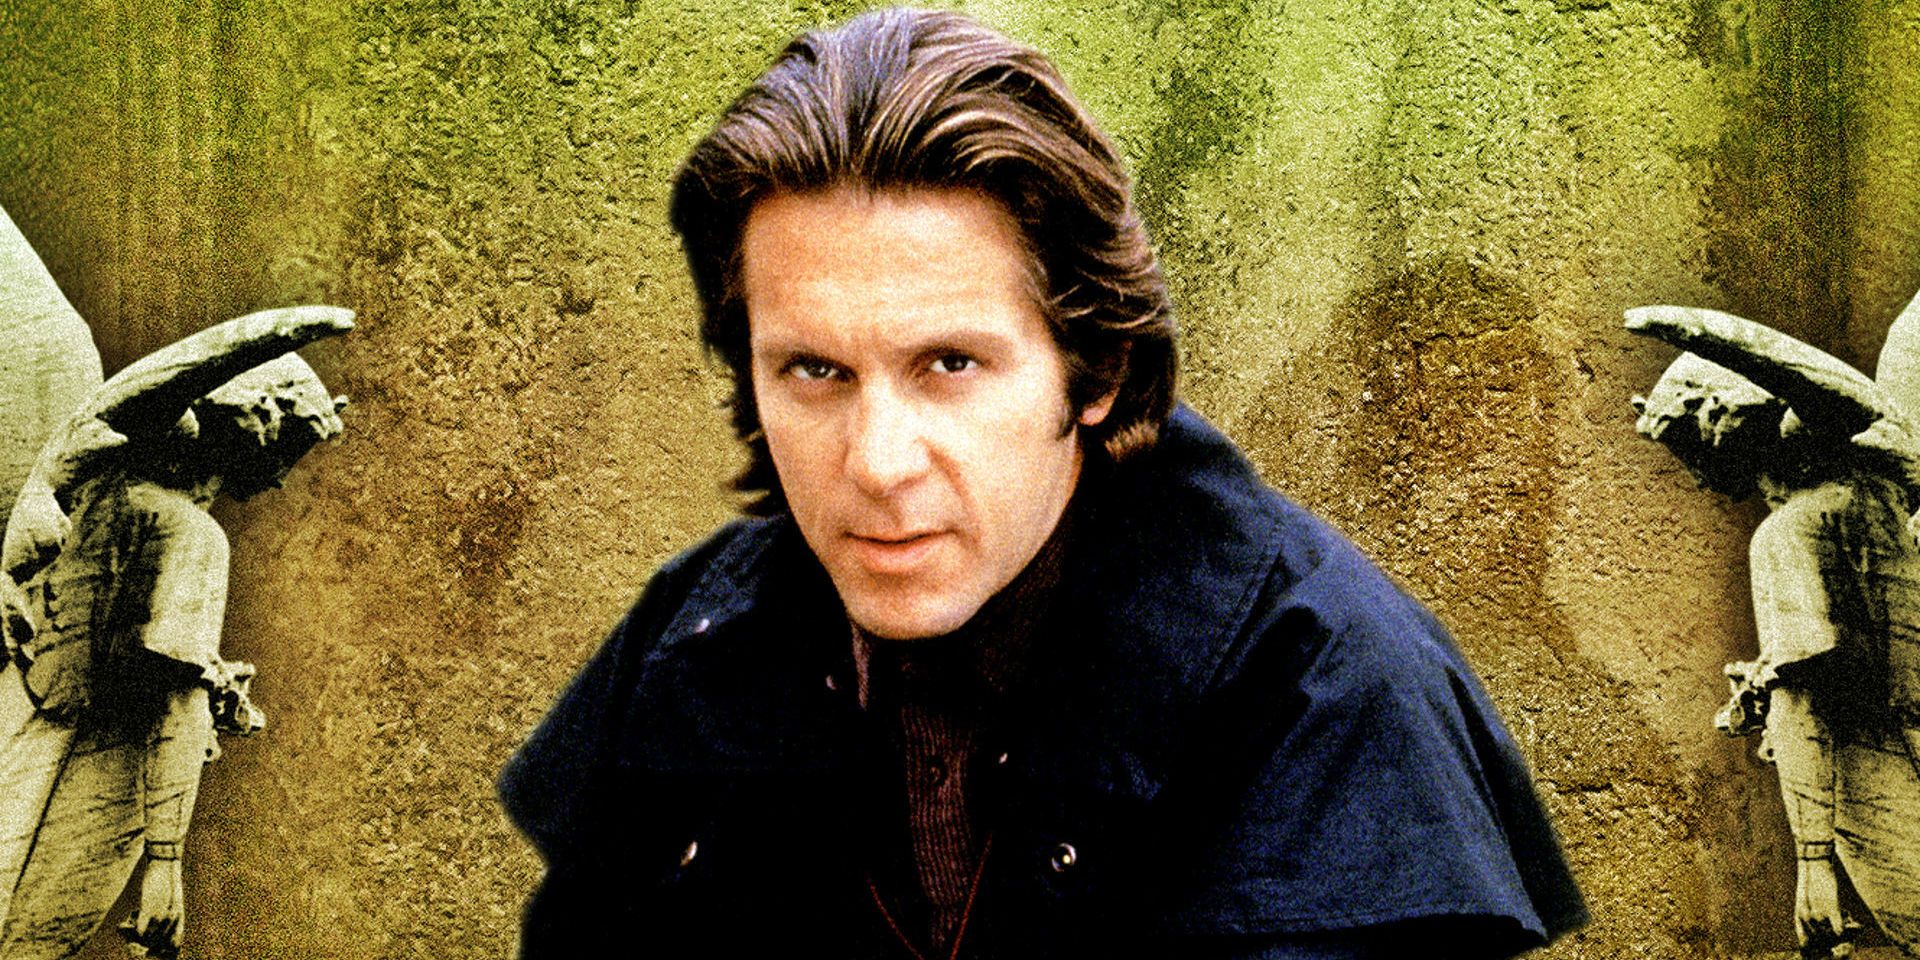  Gary Cole as Lucas Buck in American Gothic